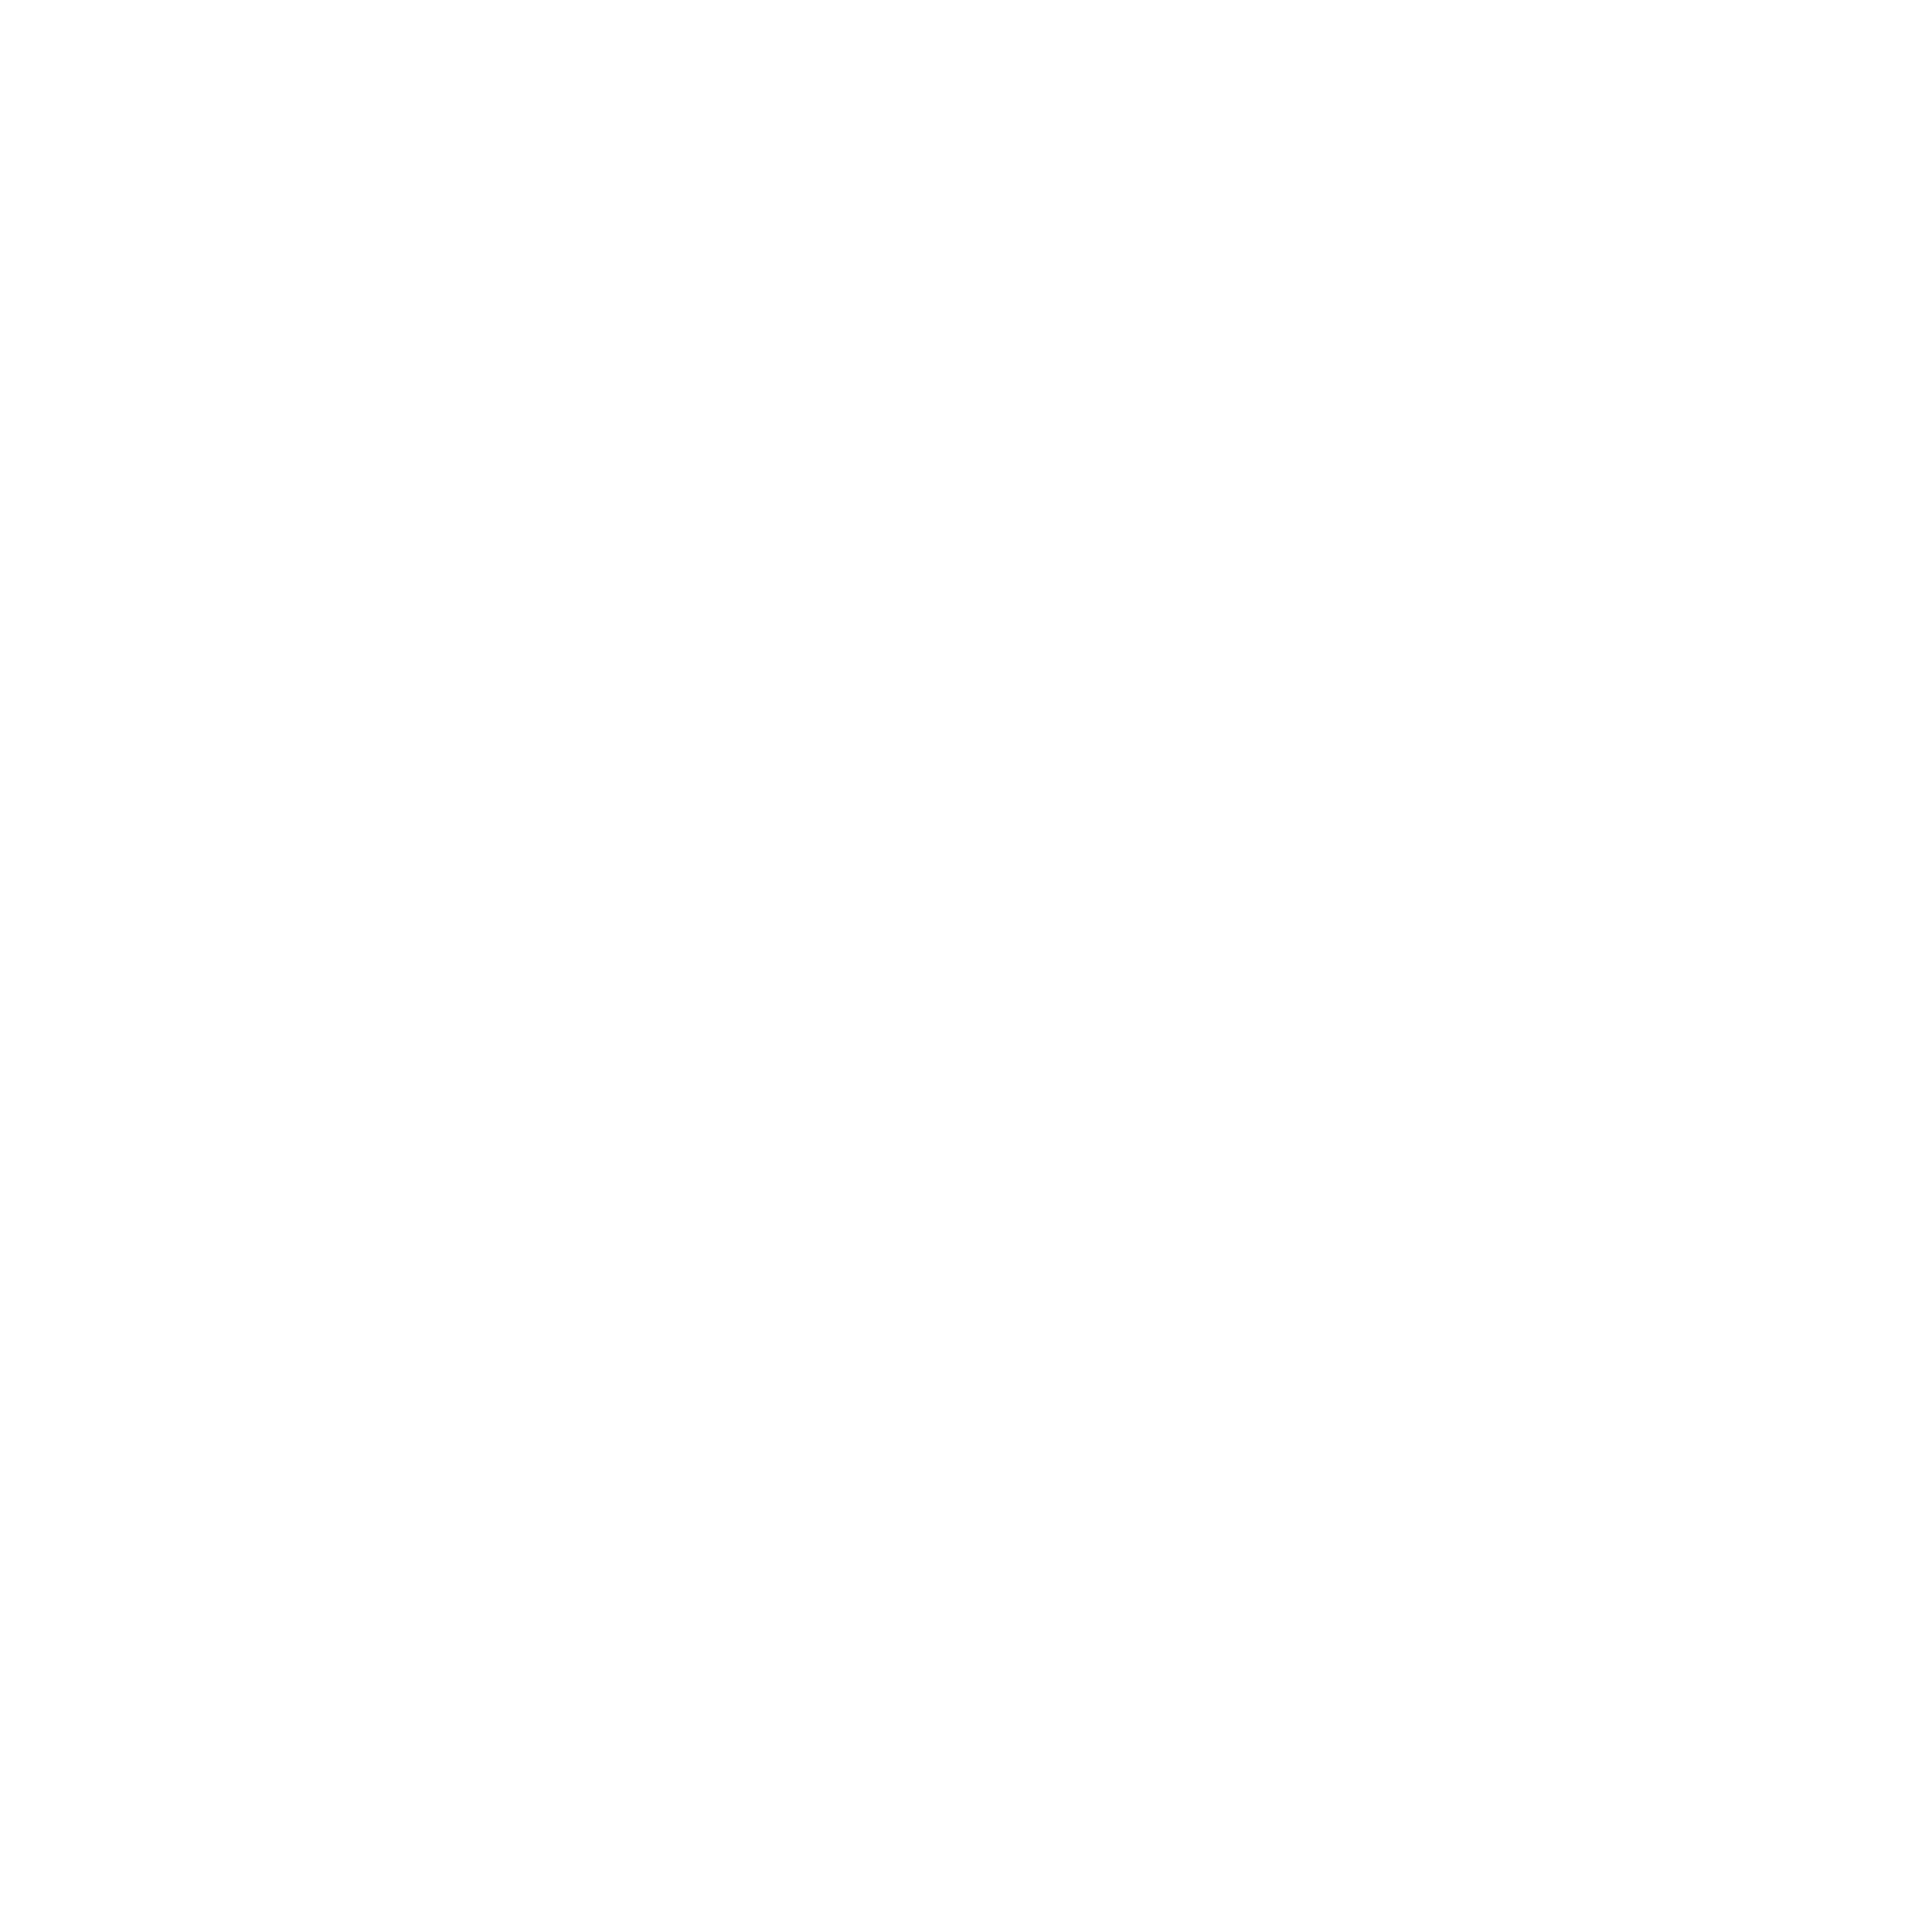 Counter Attack - Episode 167 - Josh Magennis On The Realities Of Football